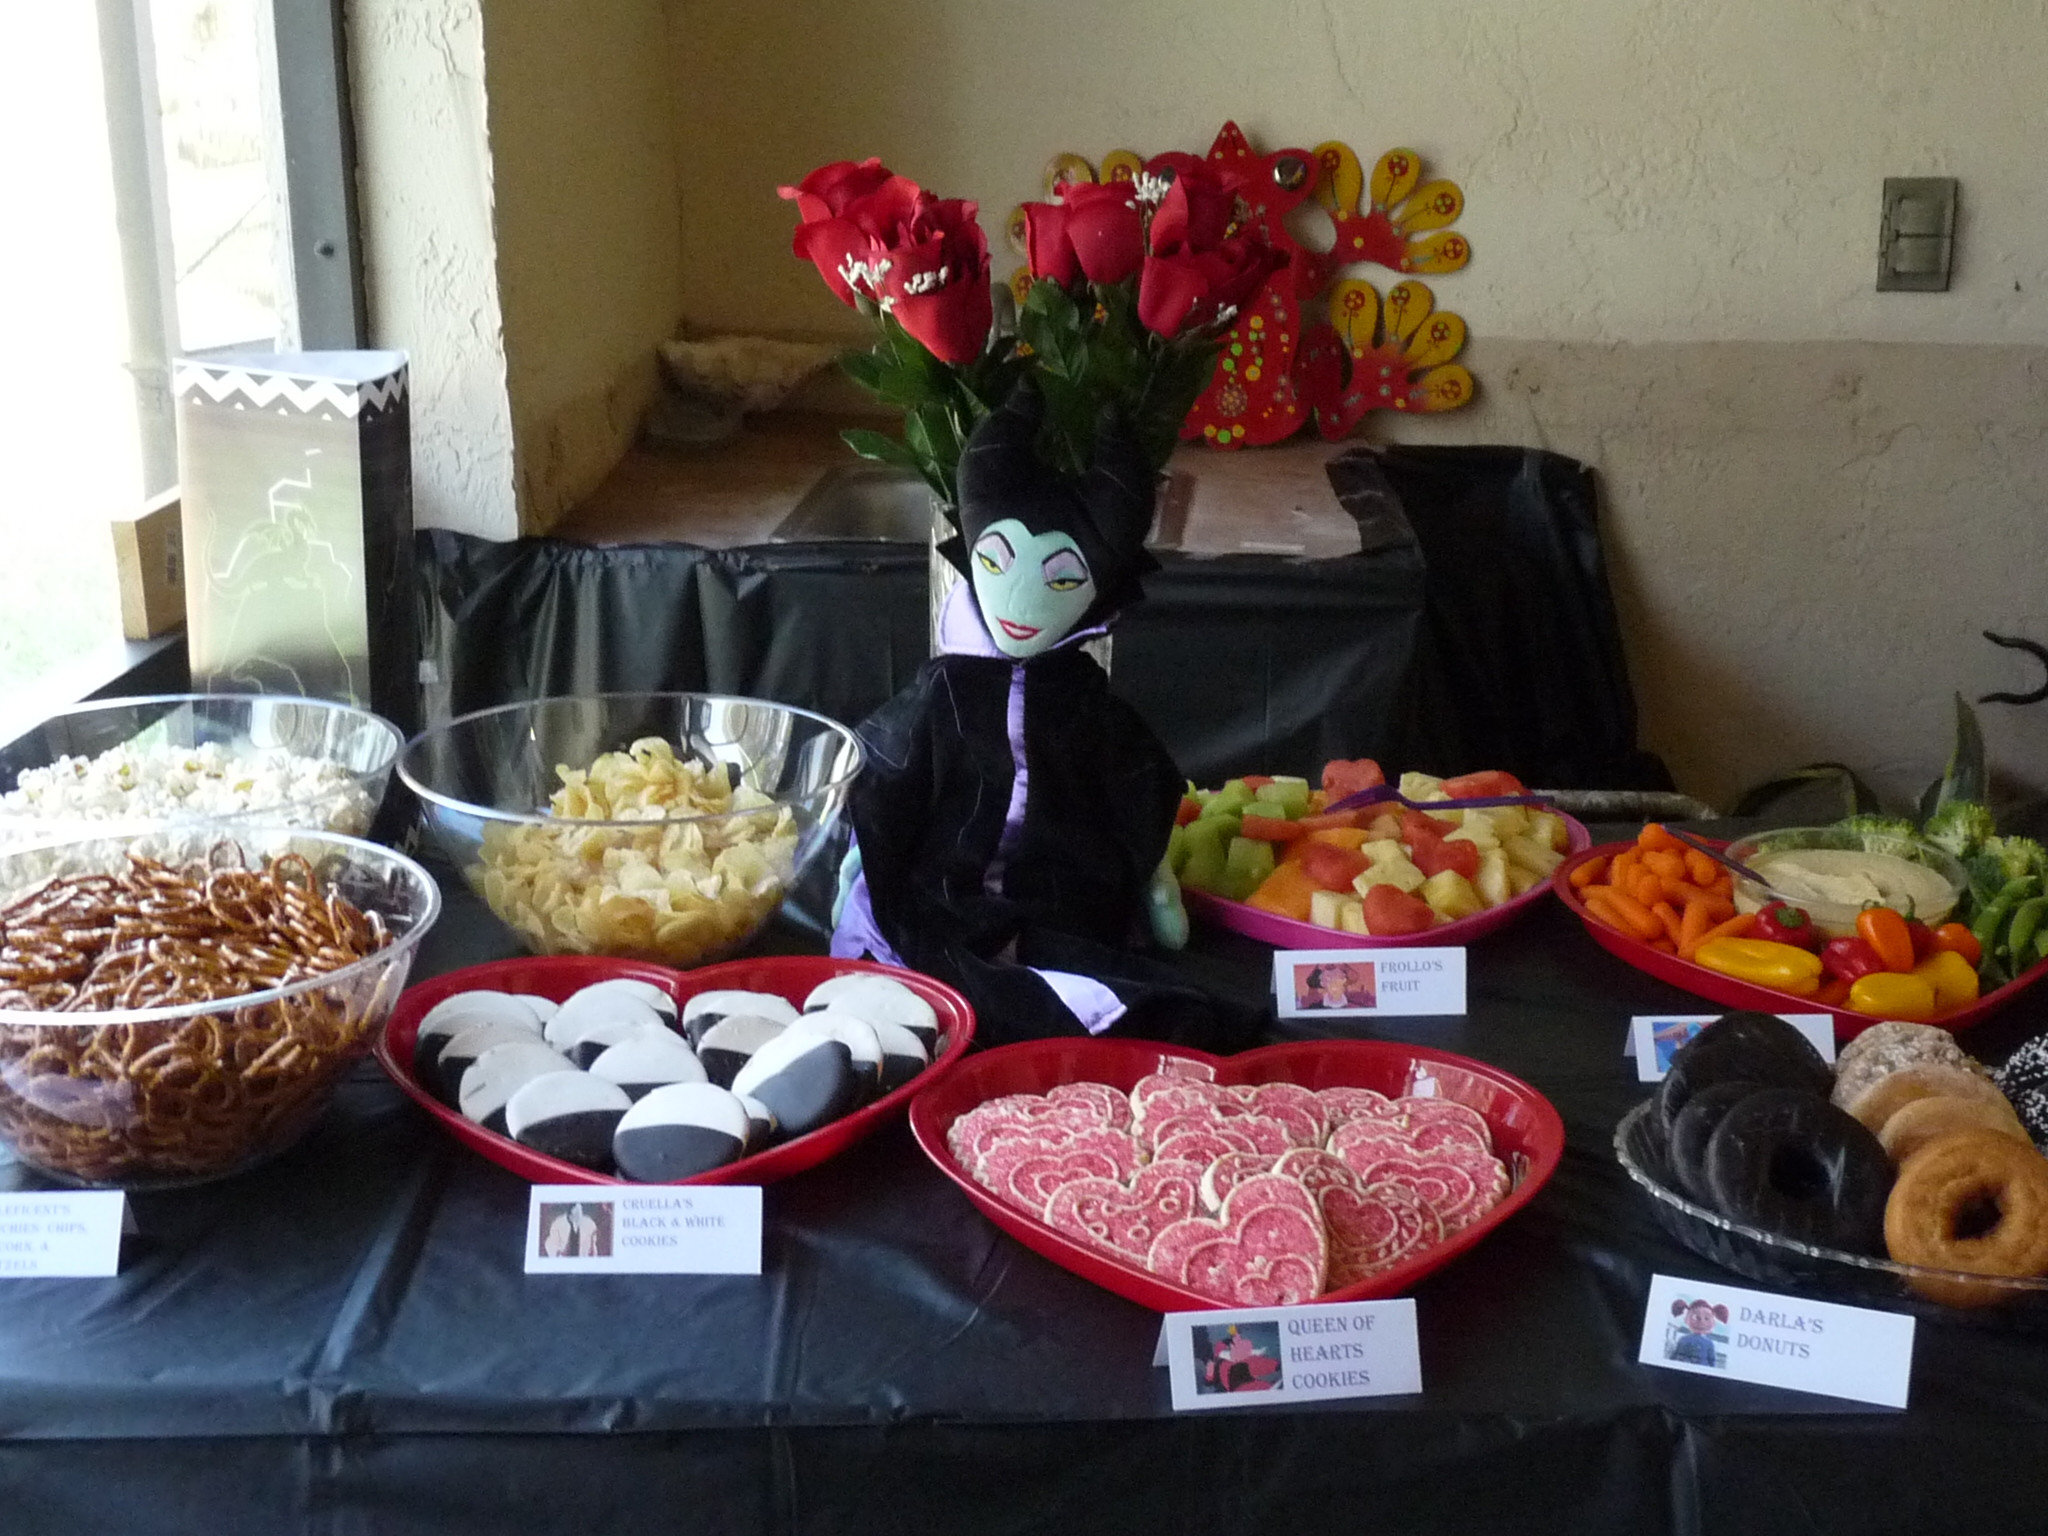 Disney Party Food Ideas
 How to Have a Disney Villaintine s Day Party and Show Your